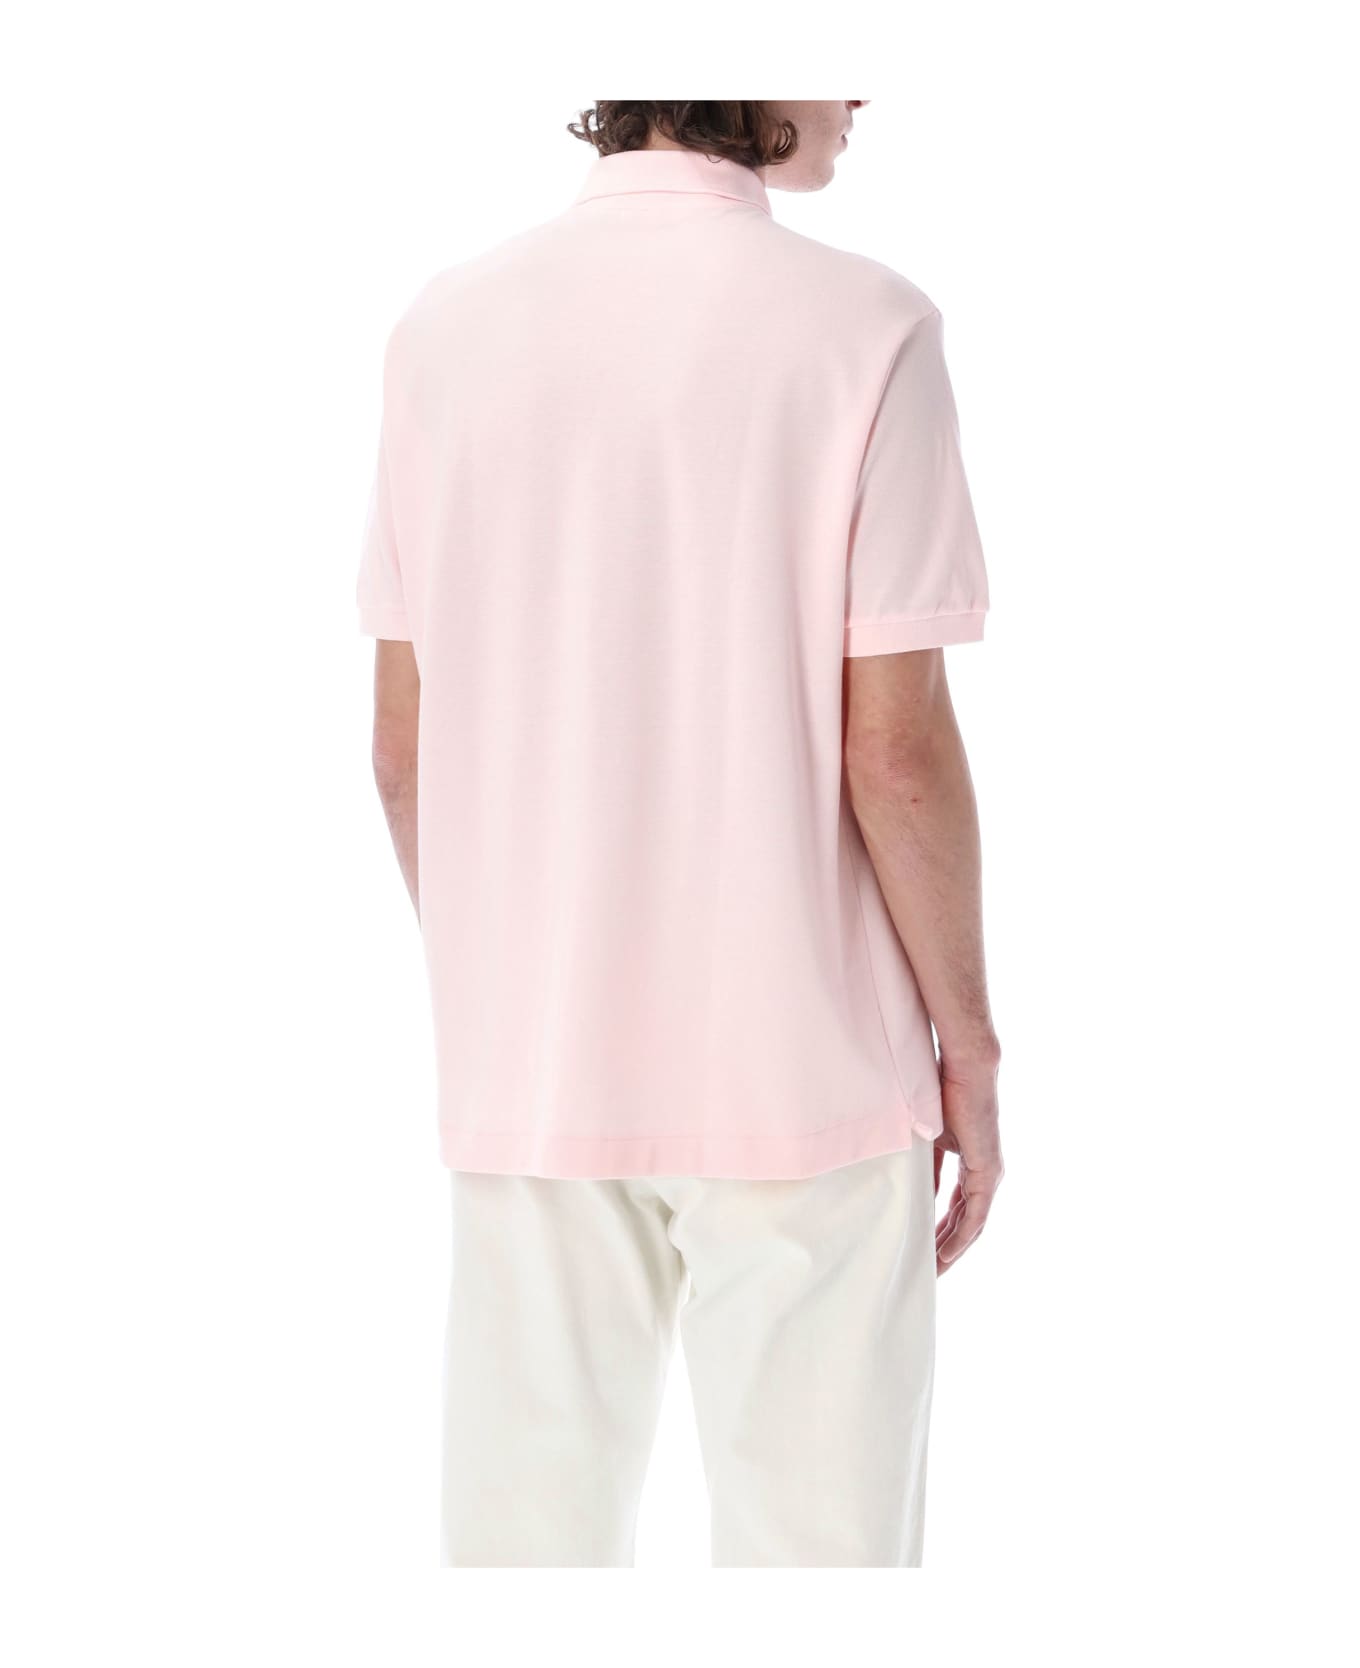 Lacoste Classic Fit Polo Shirt - PINK ポロシャツ